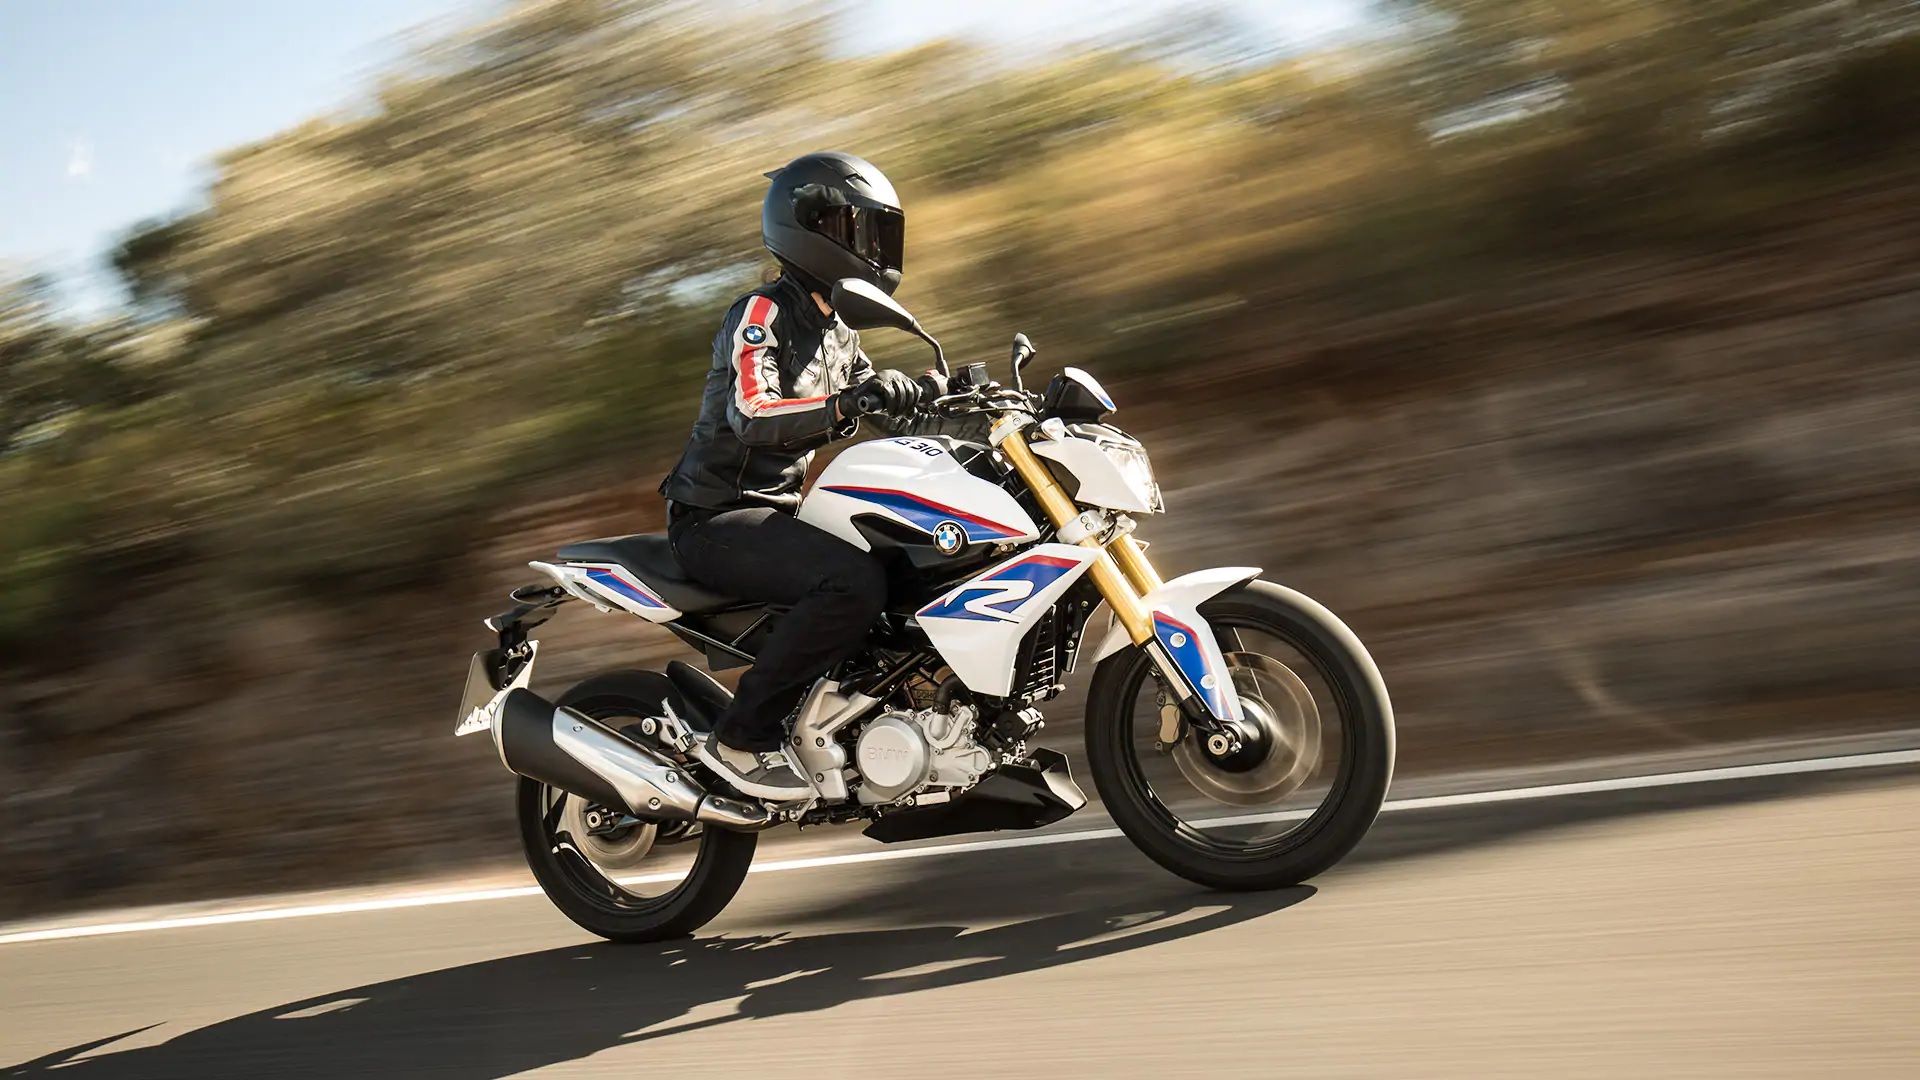 BMW G 310 R [Specs, Features, Photo]